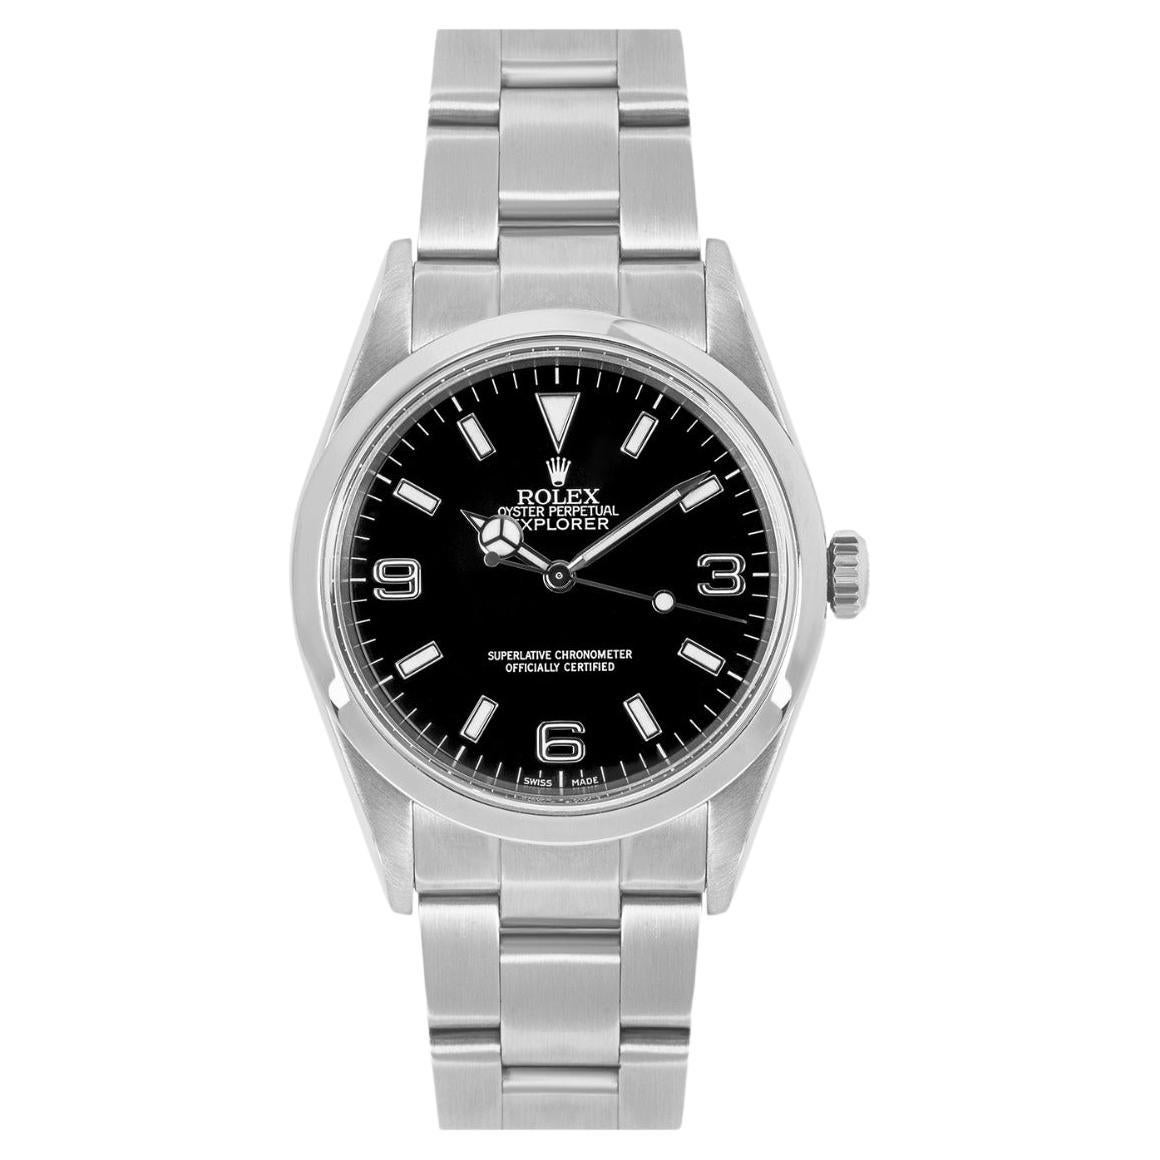 Is the Rolex Explorer a good investment?